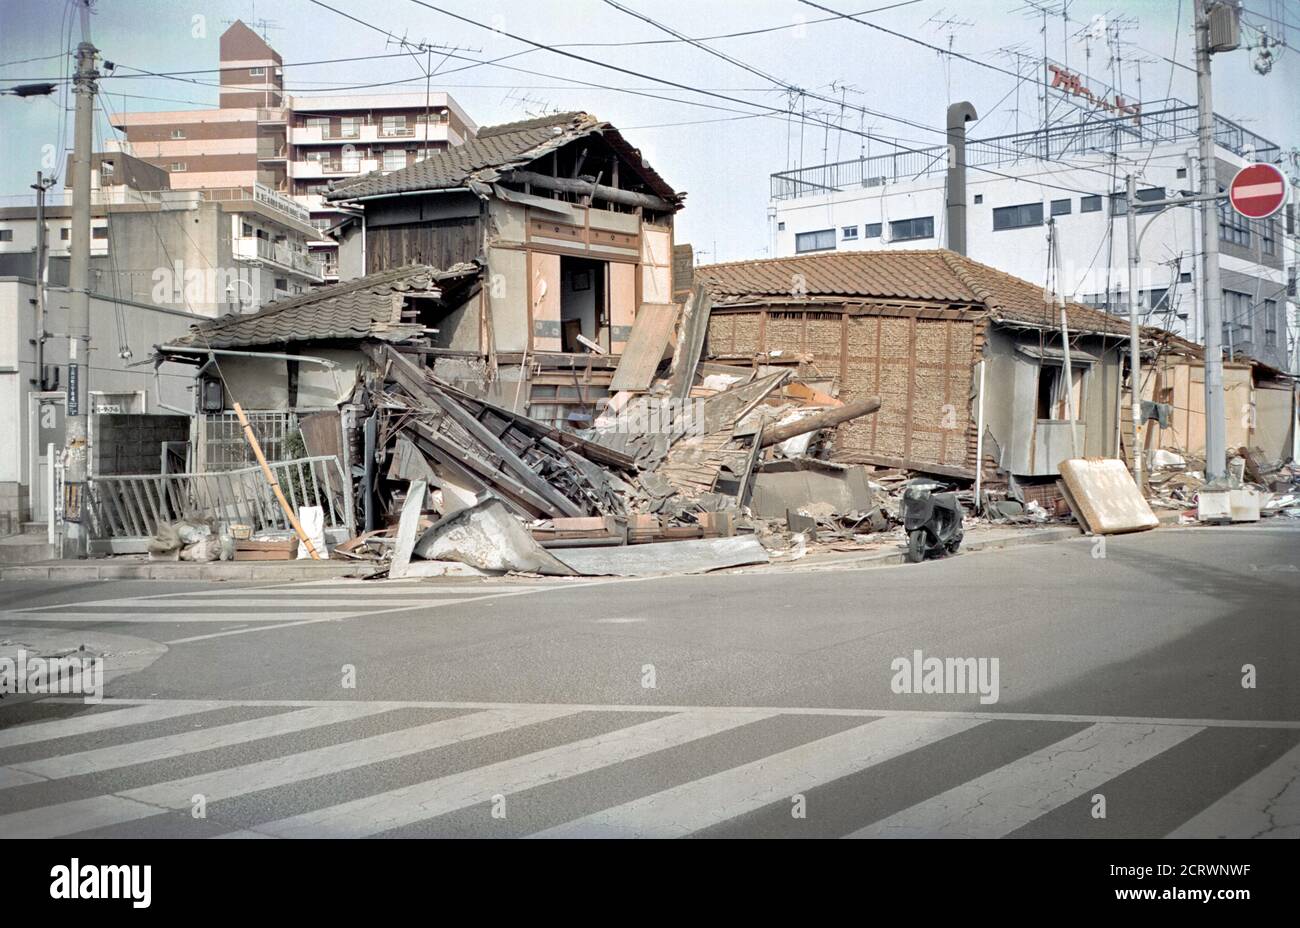 House collapsed from the 1995 Great Hanshin Earthquake in Kobe, Japan Stock Photo